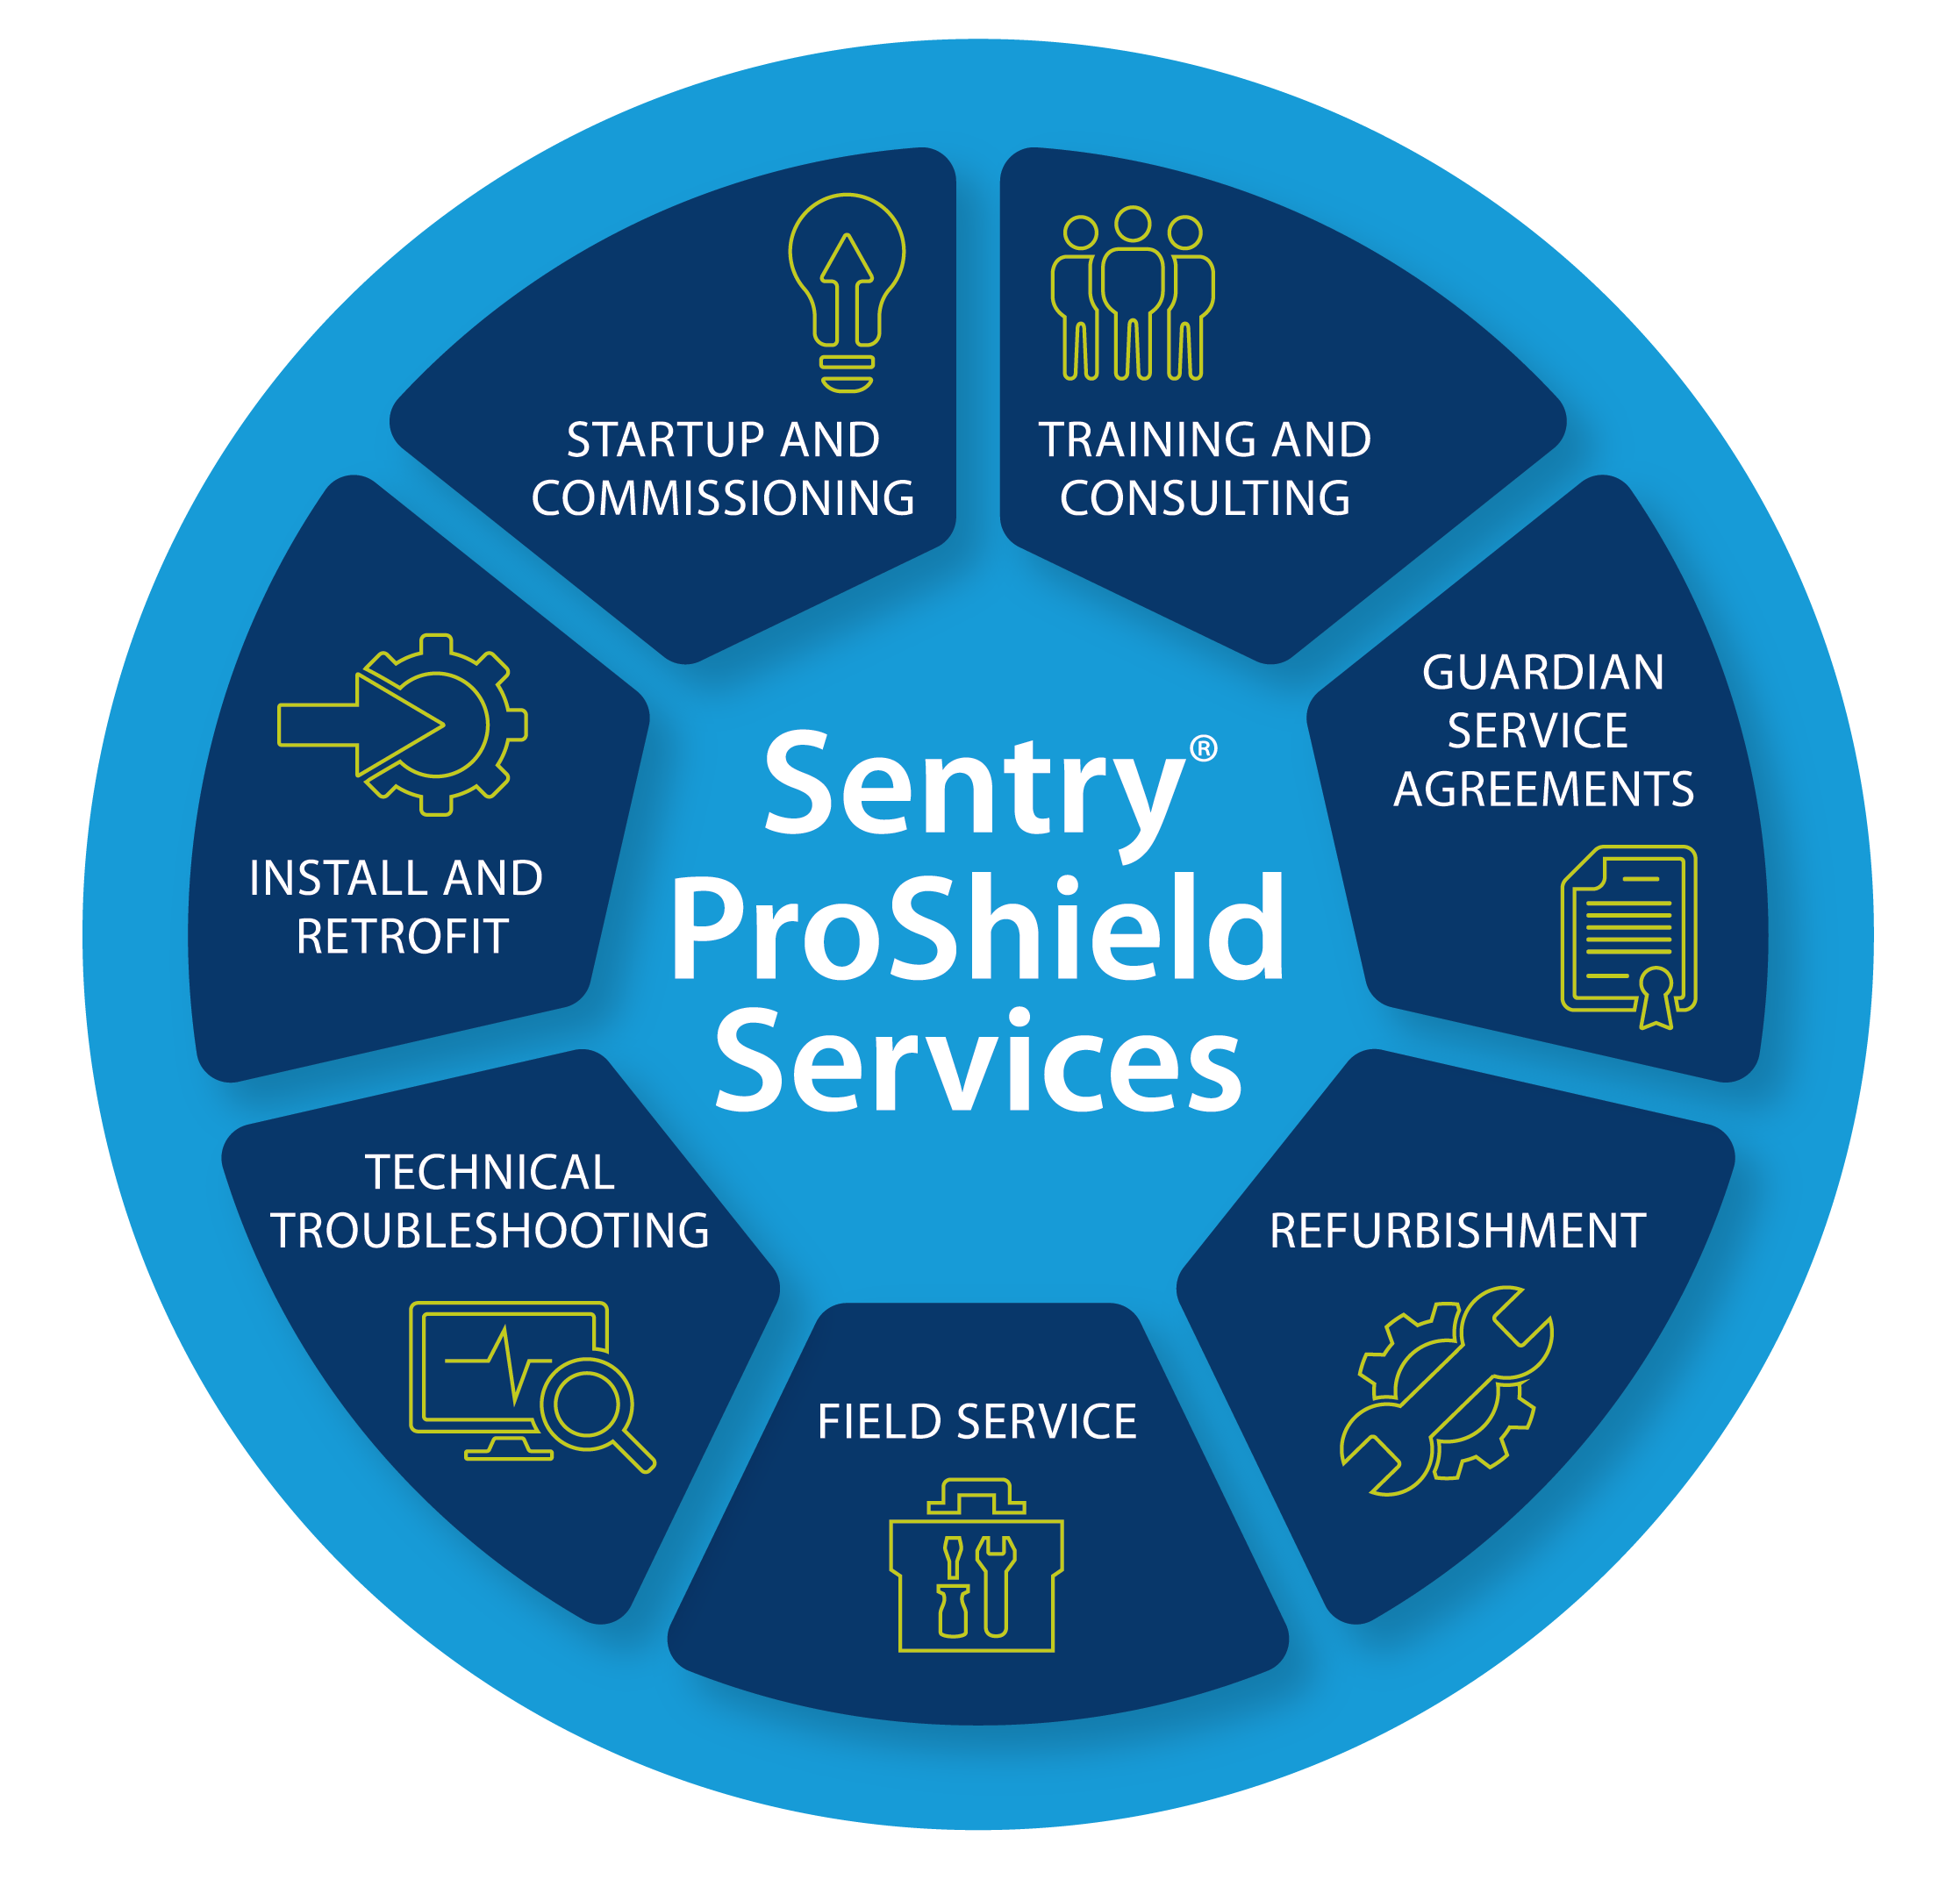 ProShield Lifecycle Services